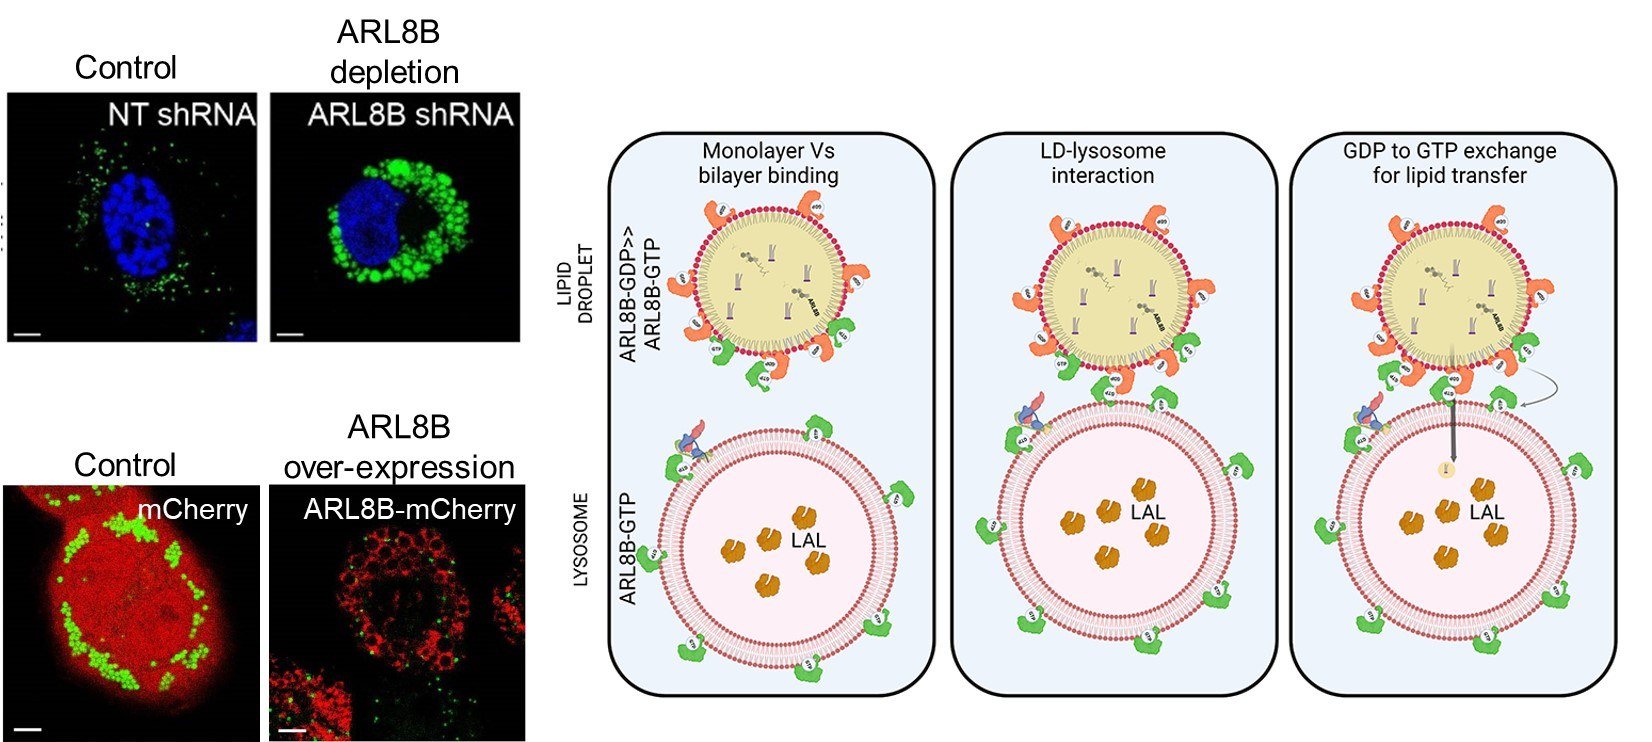 Pictorial representation of the event of LD-lysosome interaction for lipid transfer. Confocal images of macrophages (left) show how silencing of ARL8B function increases the abundance of LDs while overexpression reduces the size and number of LDs; Green= LDs. Credit: Sheetal Gandotra.